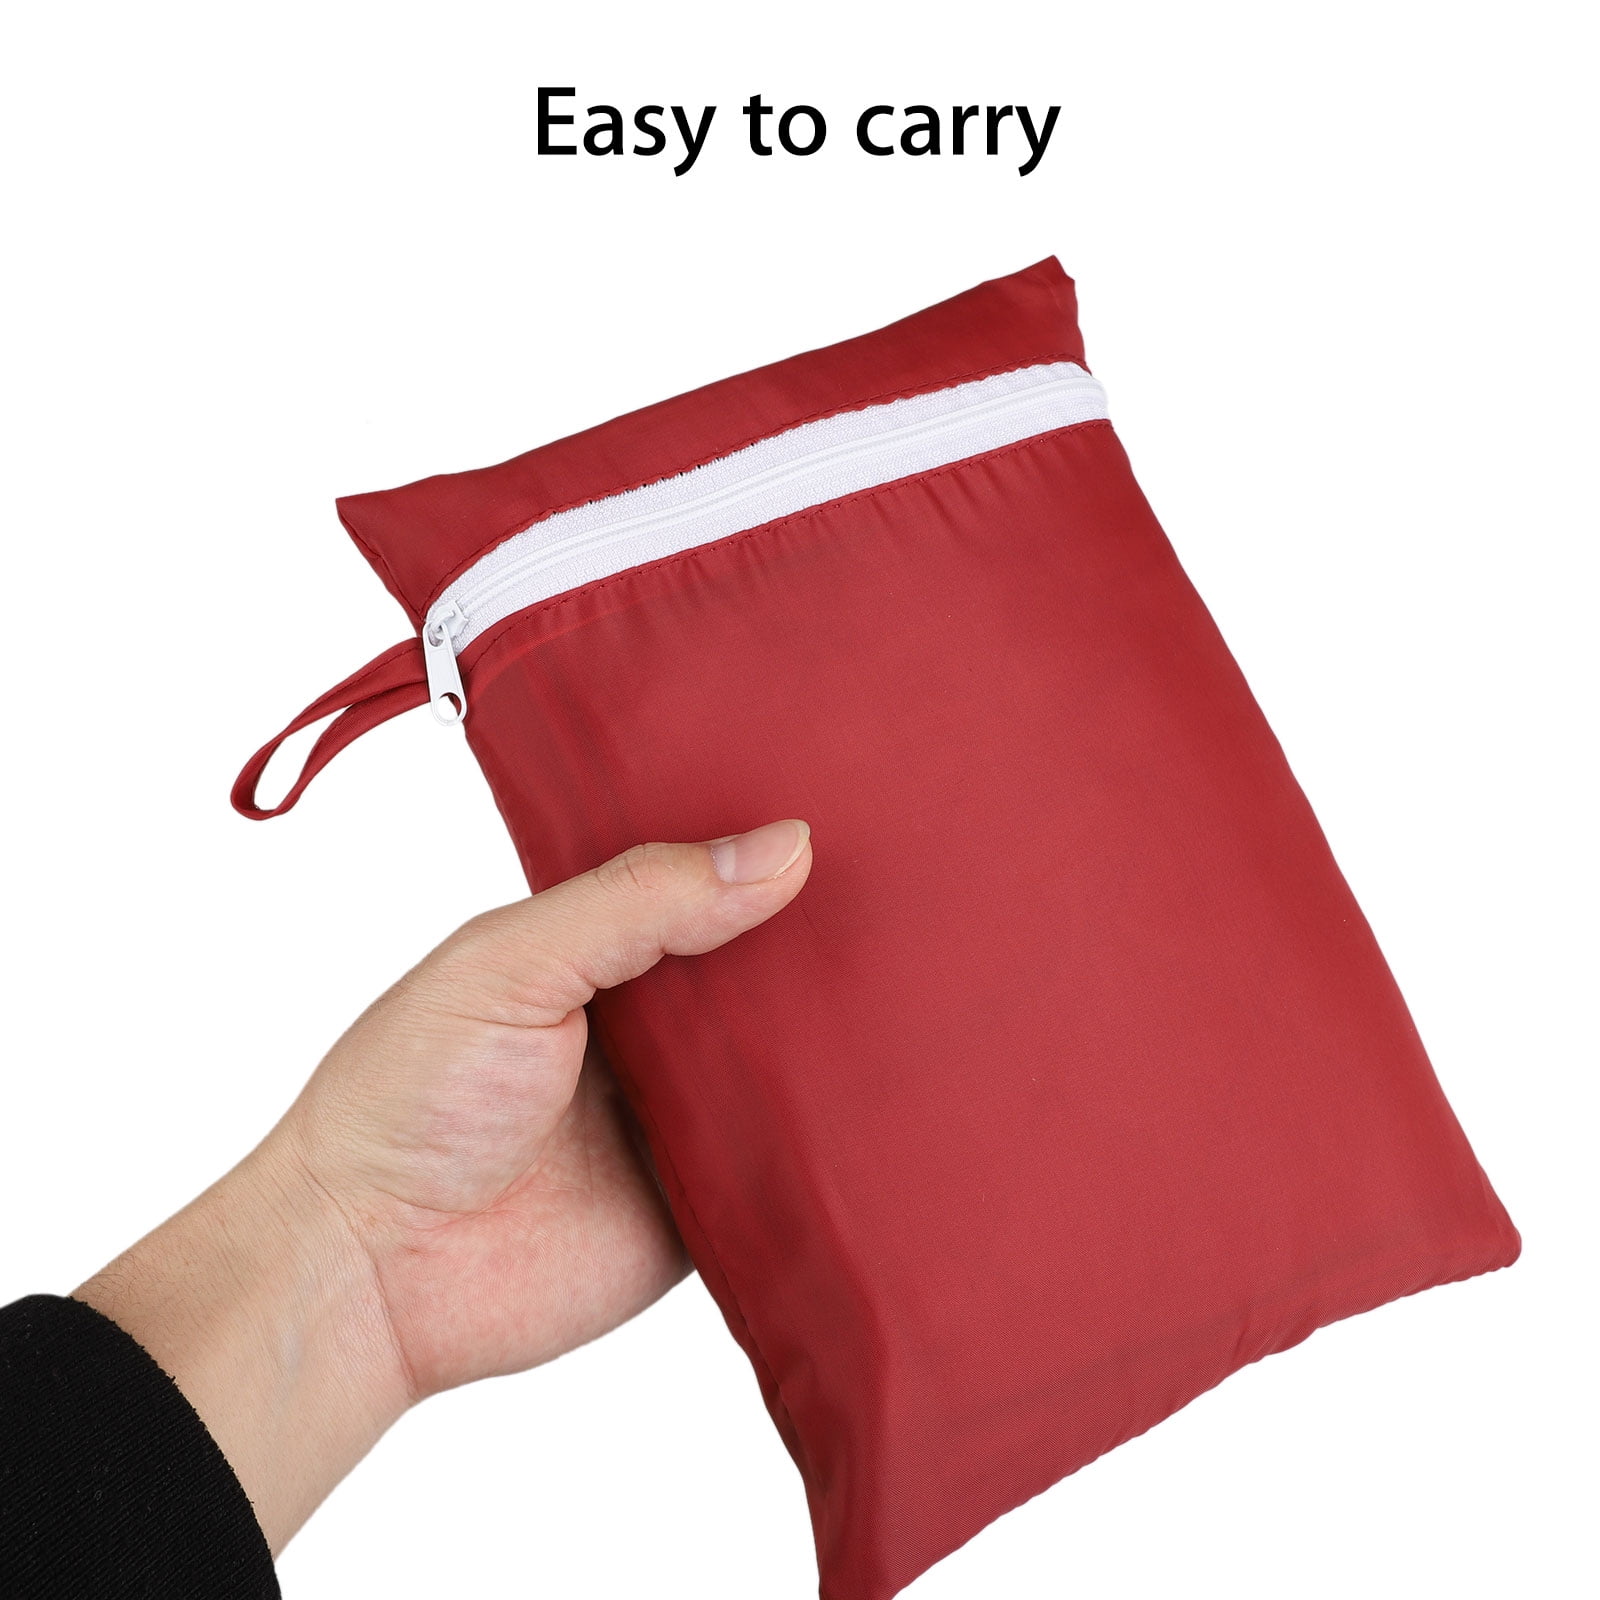  HOMEST Stand Mixer Dust Carry Bag with Pockets for